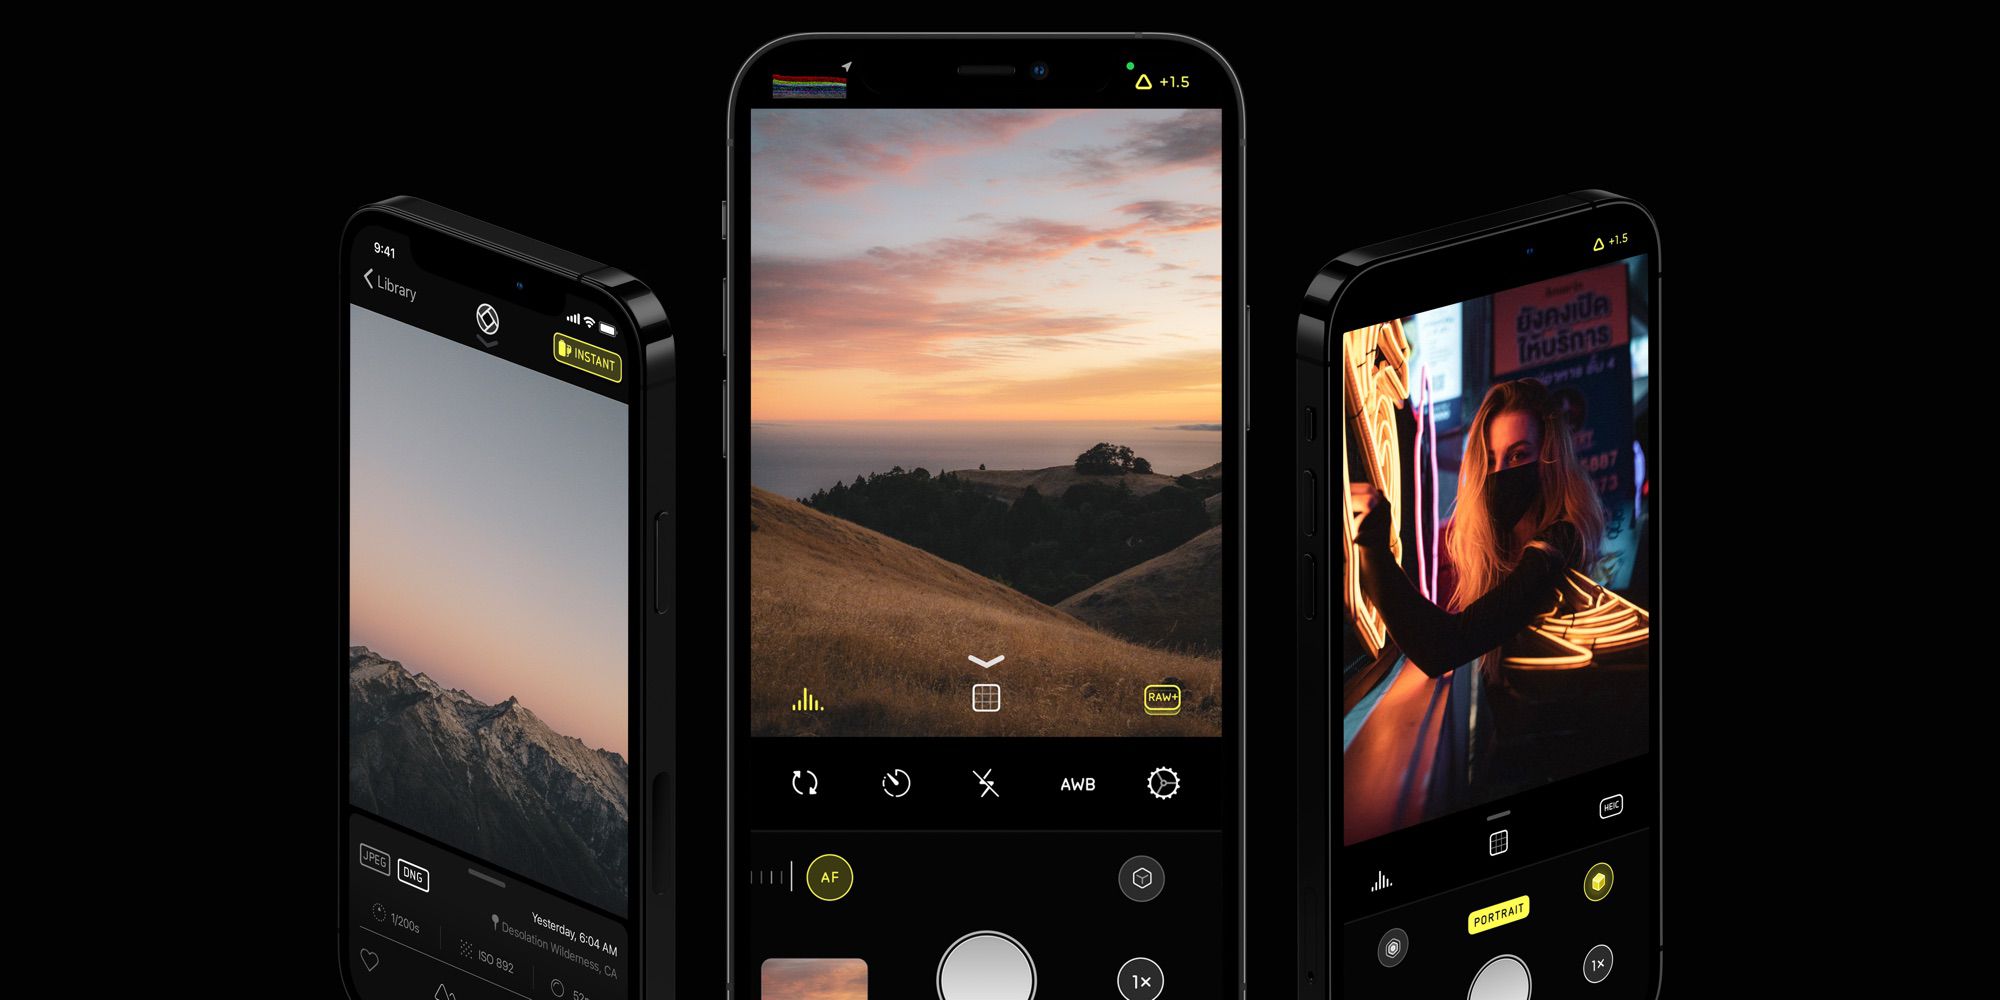 Halide's New Feature Lets You Take Virtual Telephoto Shots on Non-Pro iPhones - macrumors.com